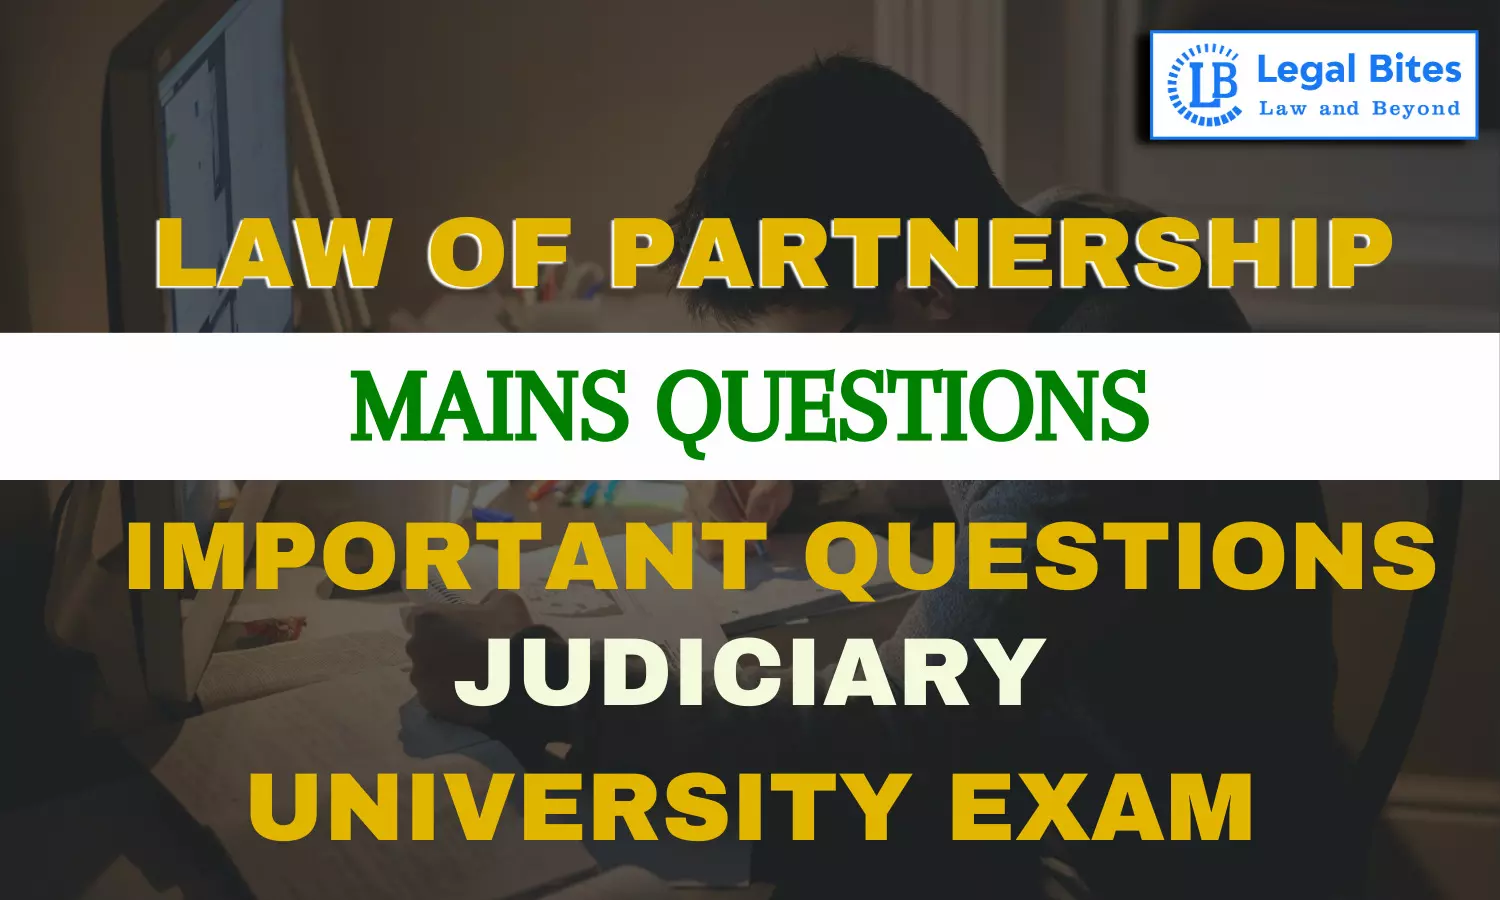 Can a minor be partner in a firm? If so, discuss his position before attaining majority and after attaining majority.